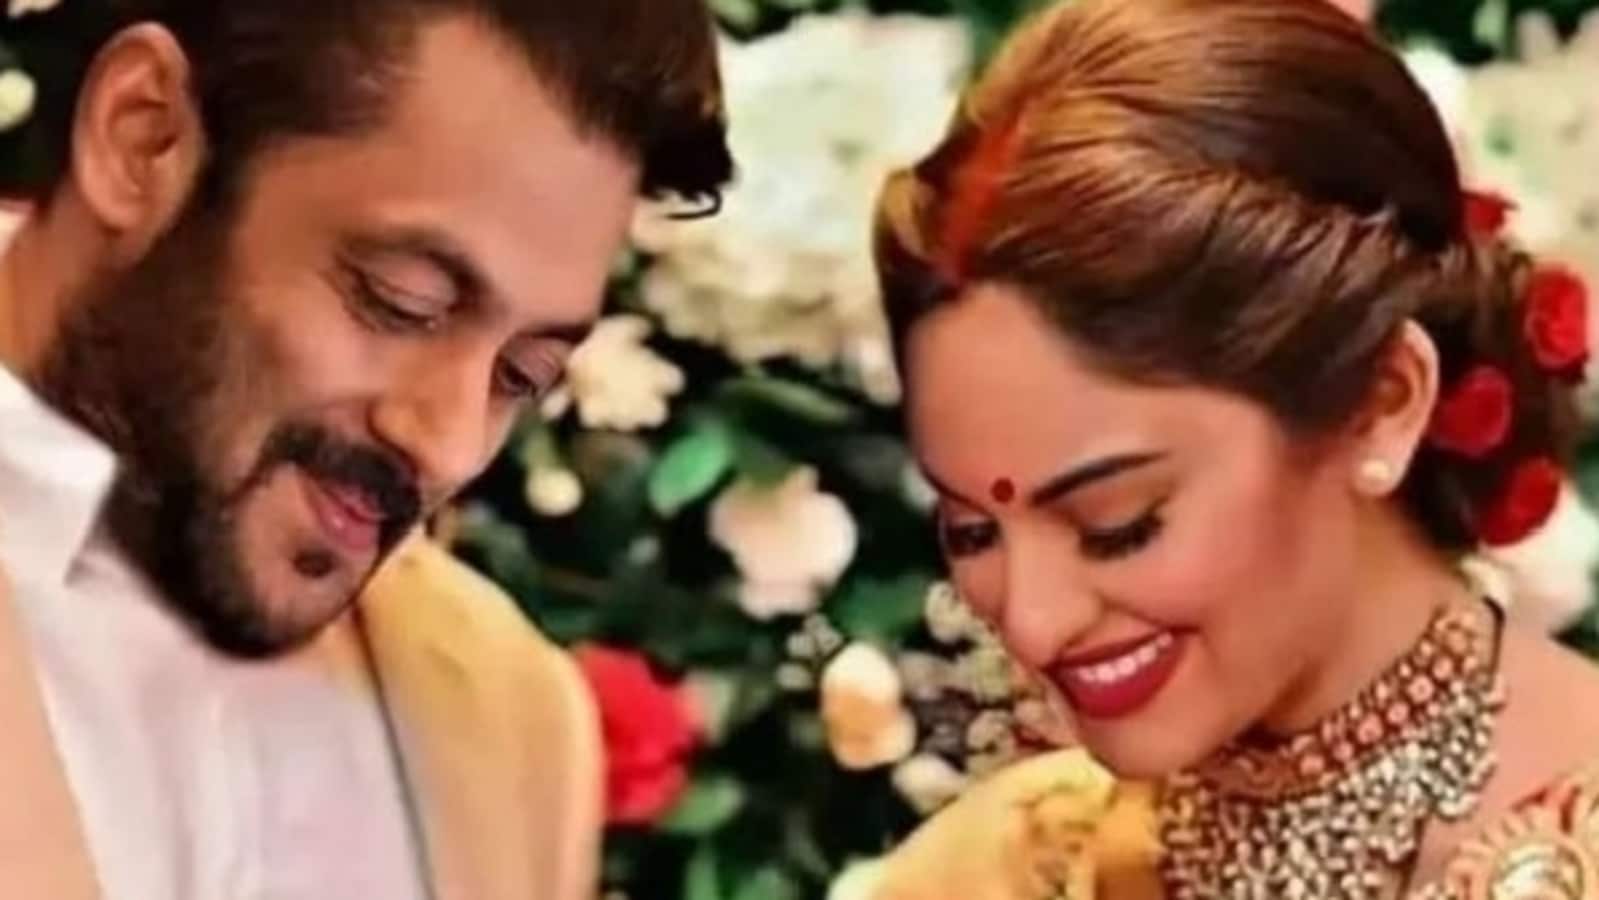 Salman Khan Sonakshi Sinha Sex - Salman, Sonakshi's fans are confused as fake pic shows them as a married  couple | Bollywood - Hindustan Times